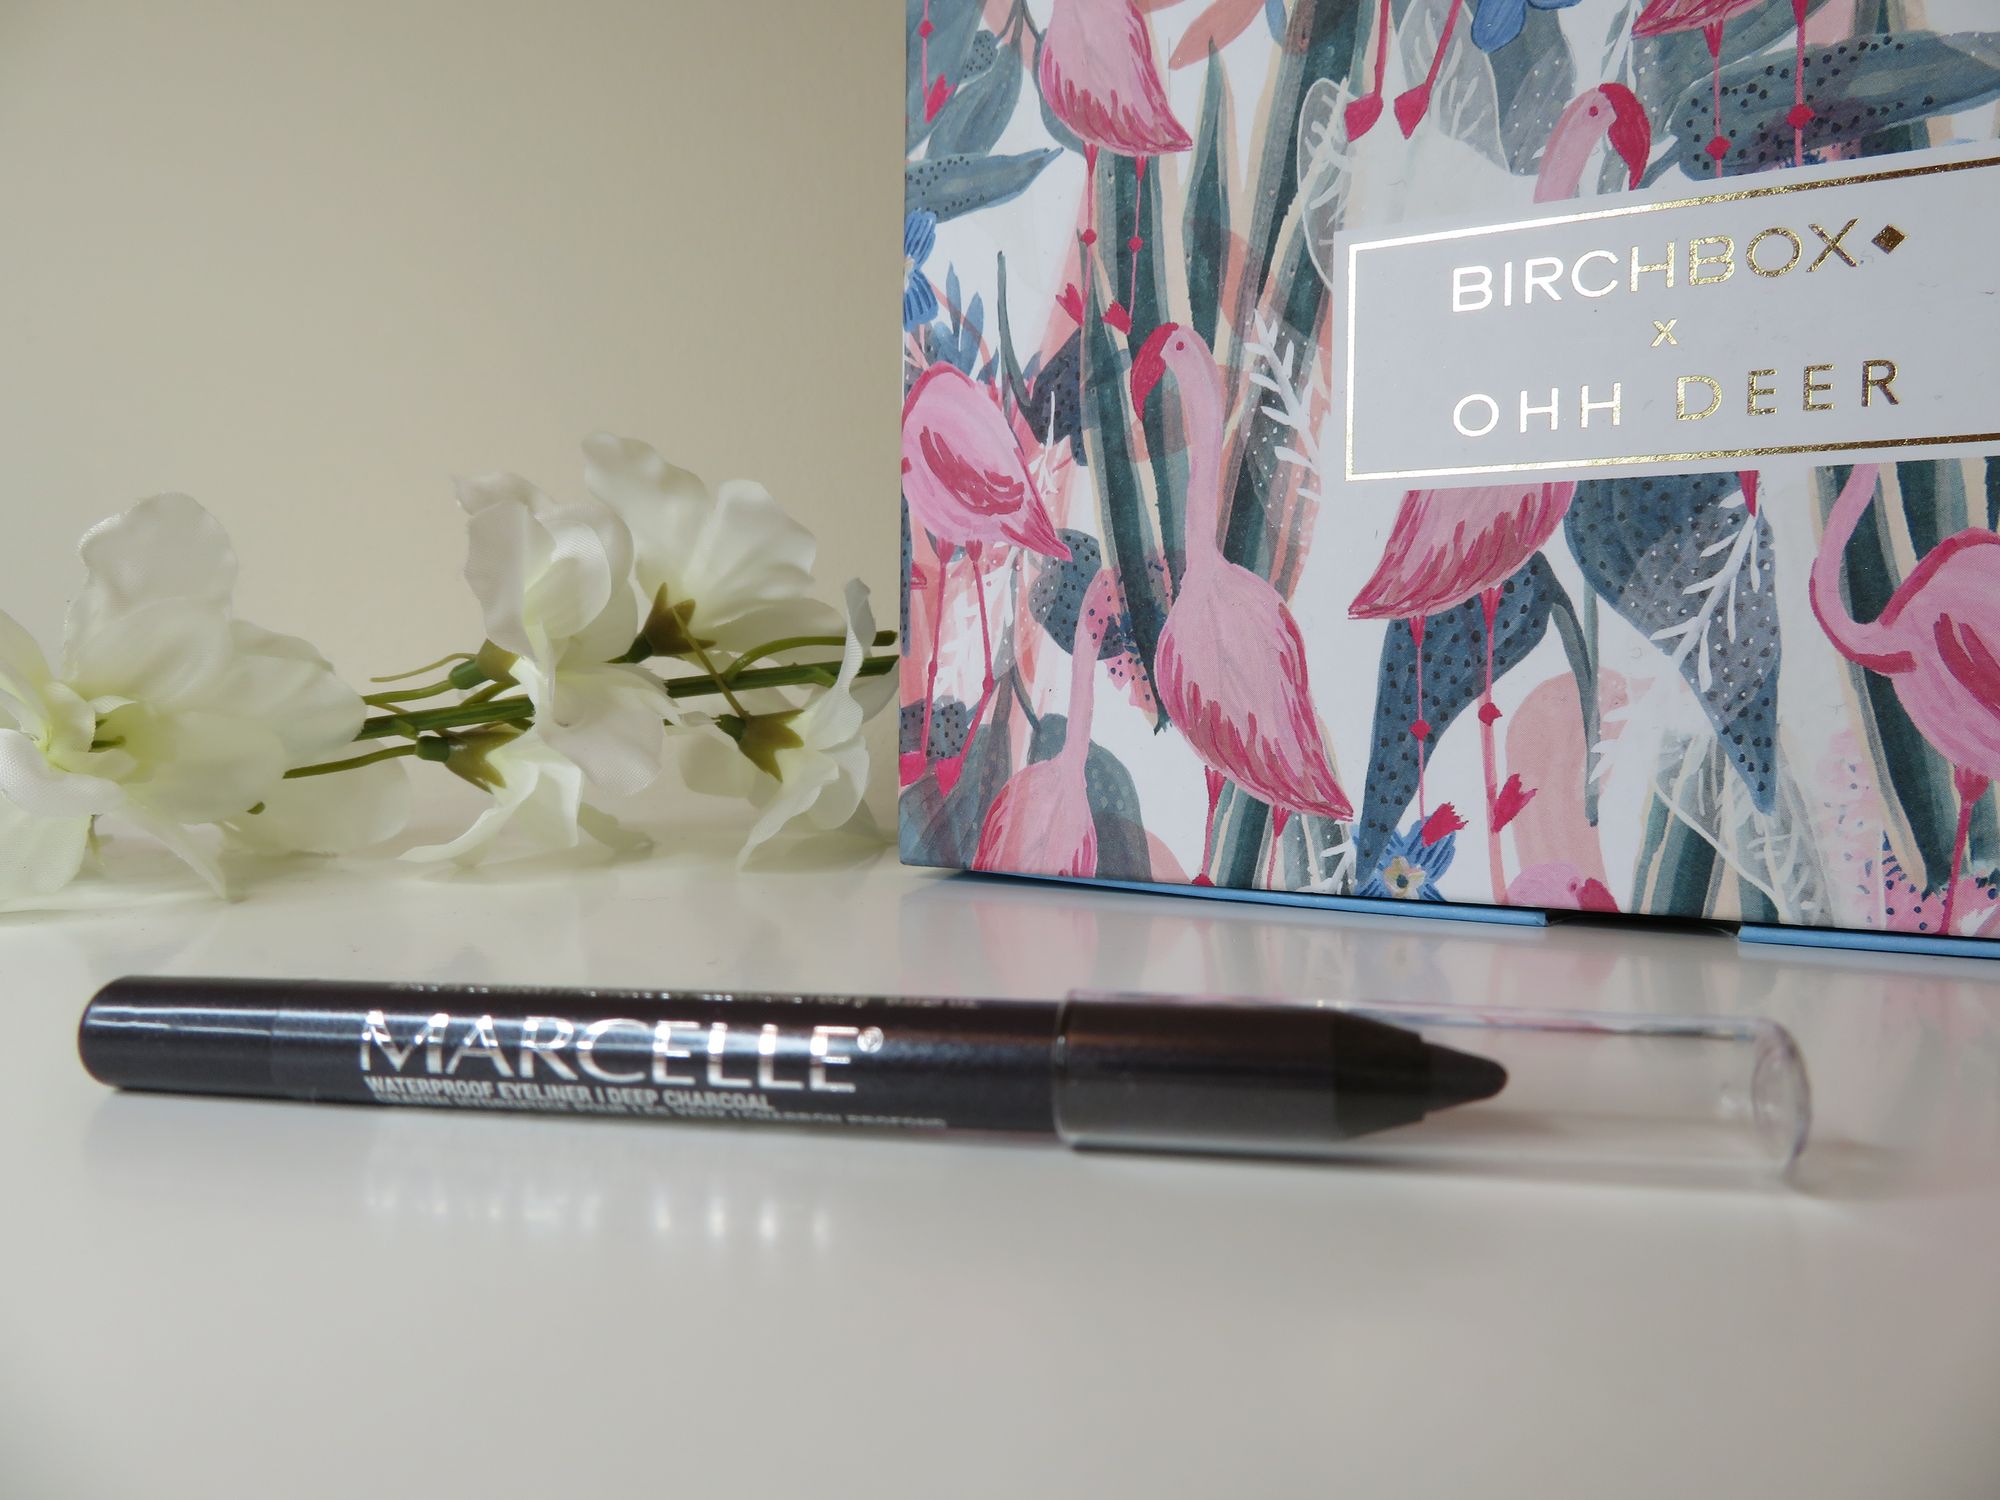 Marcelle Waterproof Eyeliner Charcoal - Birchbox Review January 2018 - Miss Boux